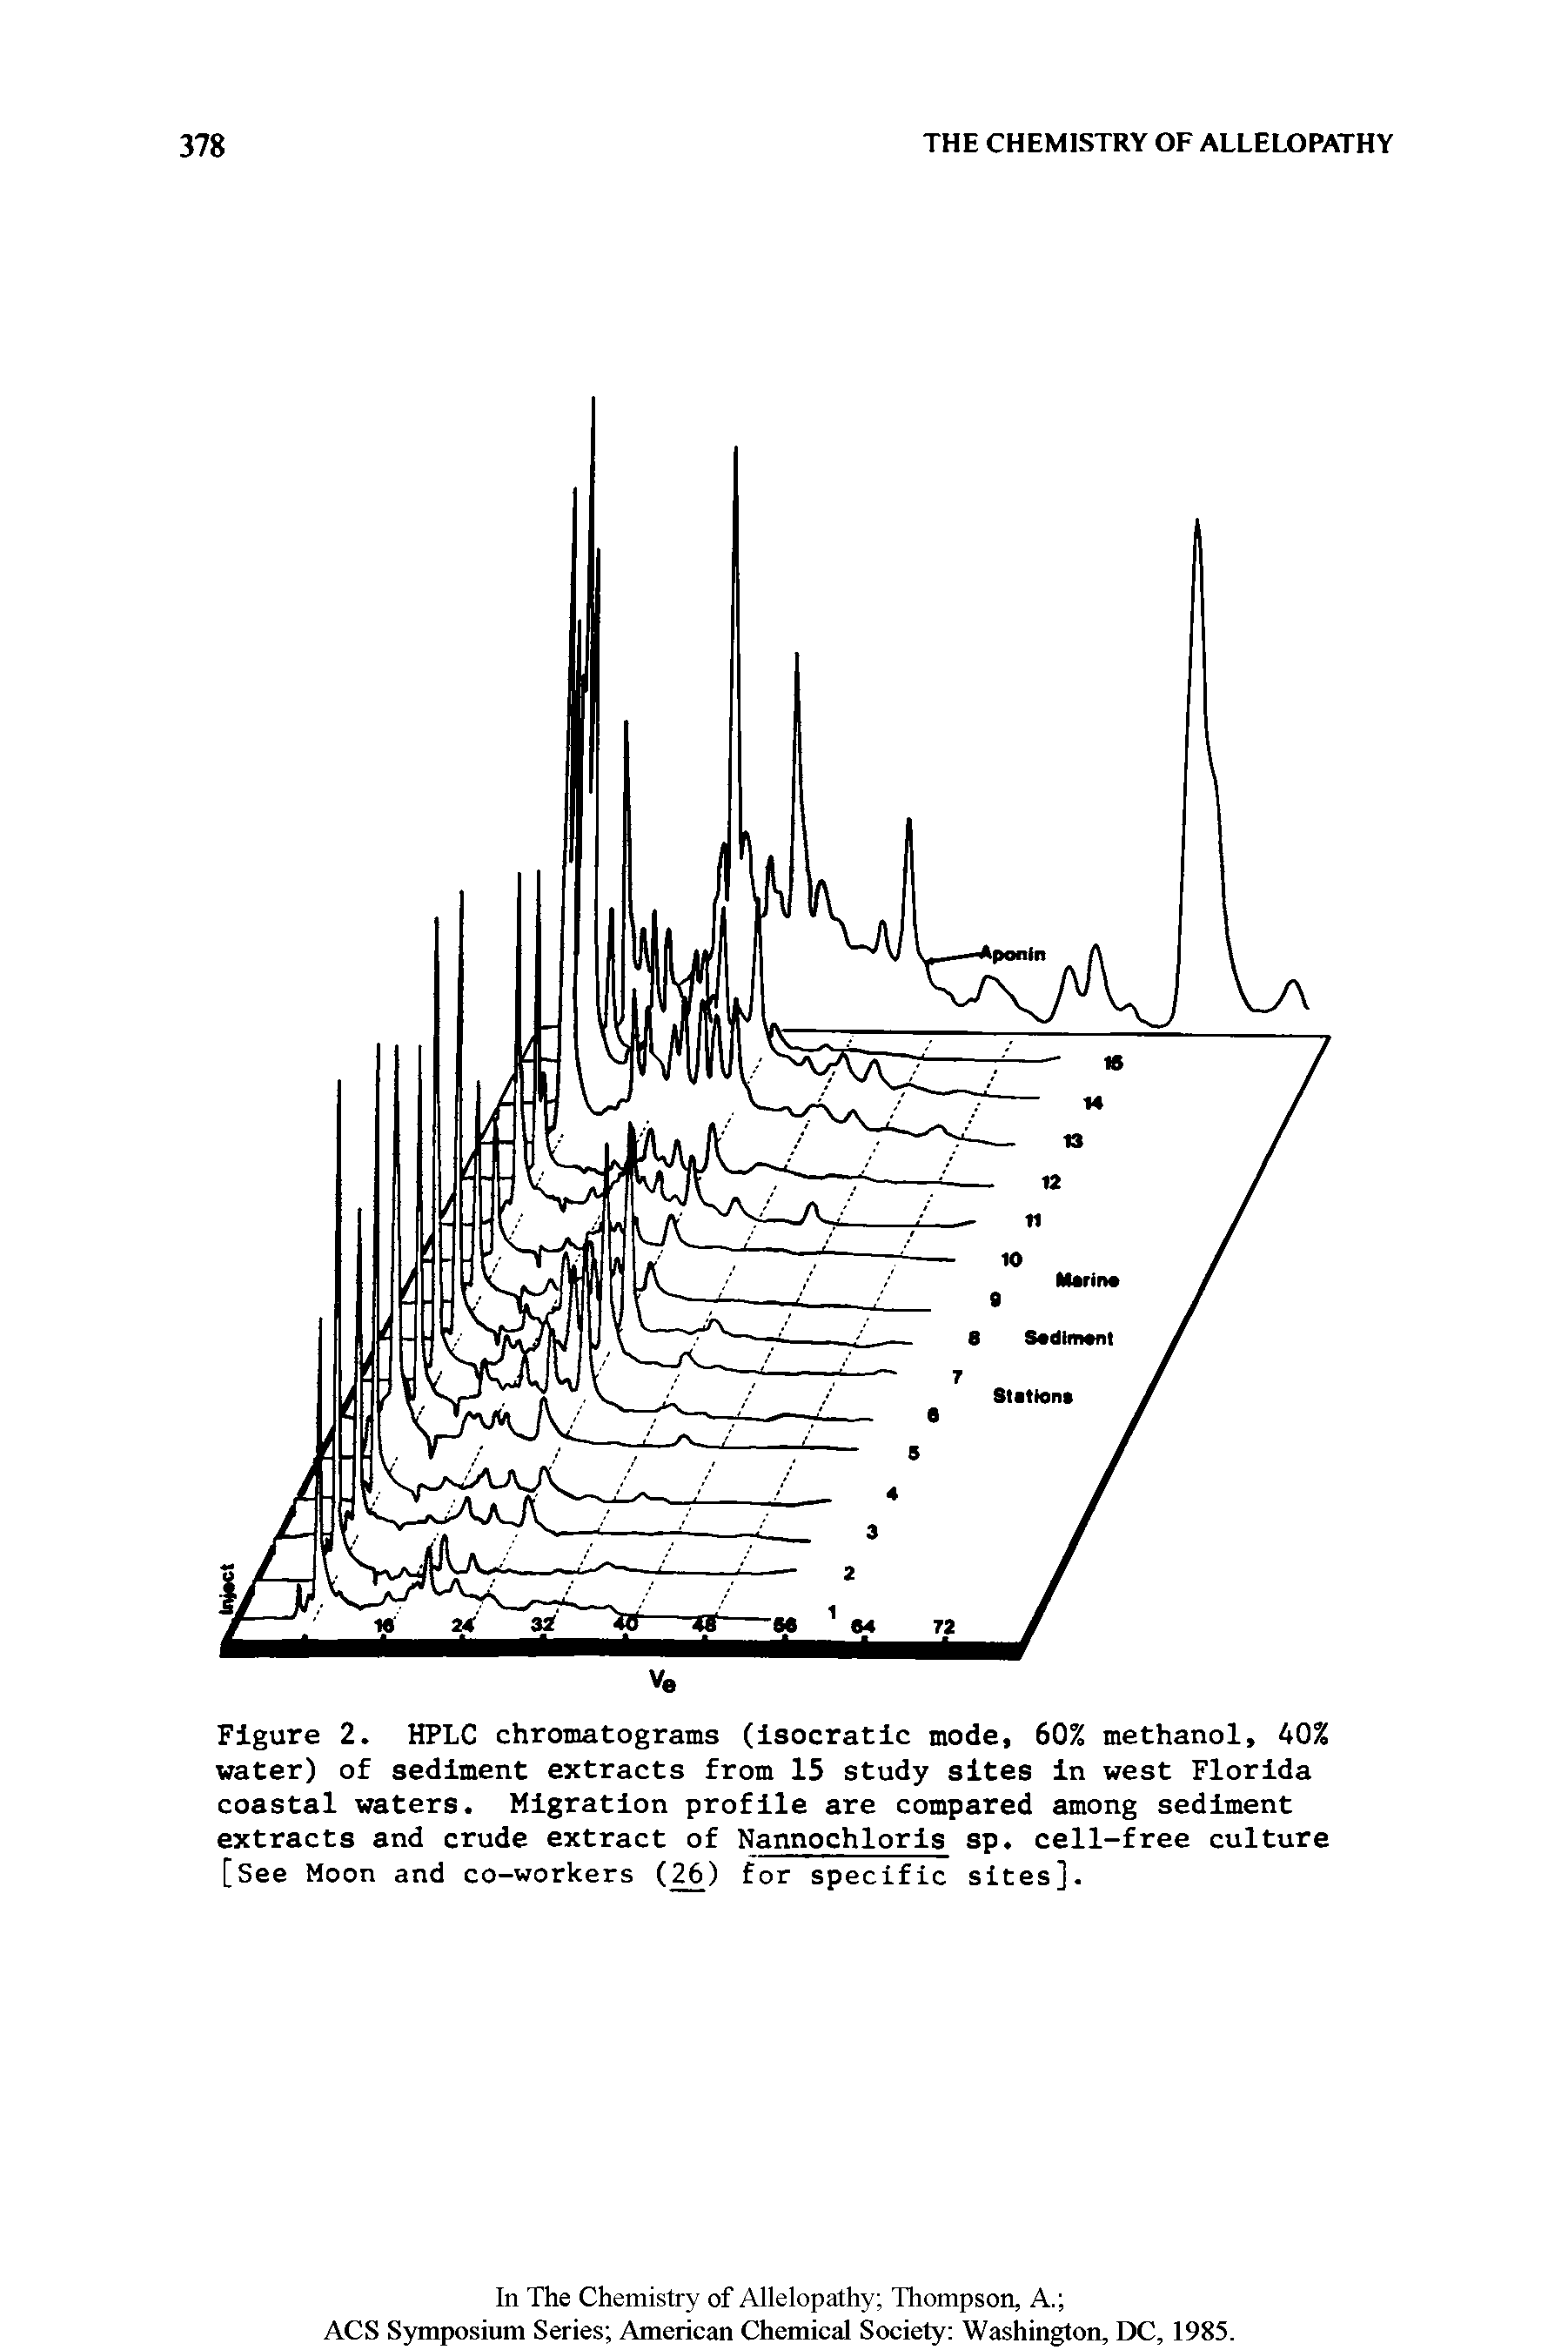 Figure 2. HPLC chromatograms (isocratic mode, 60% methanol, 40% water) of sediment extracts from 15 study sites in west Florida coastal waters. Migration profile are compared among sediment extracts and crude extract of Nannochloris sp. cell-free culture [See Moon and co-workers (.26) for specific sites].